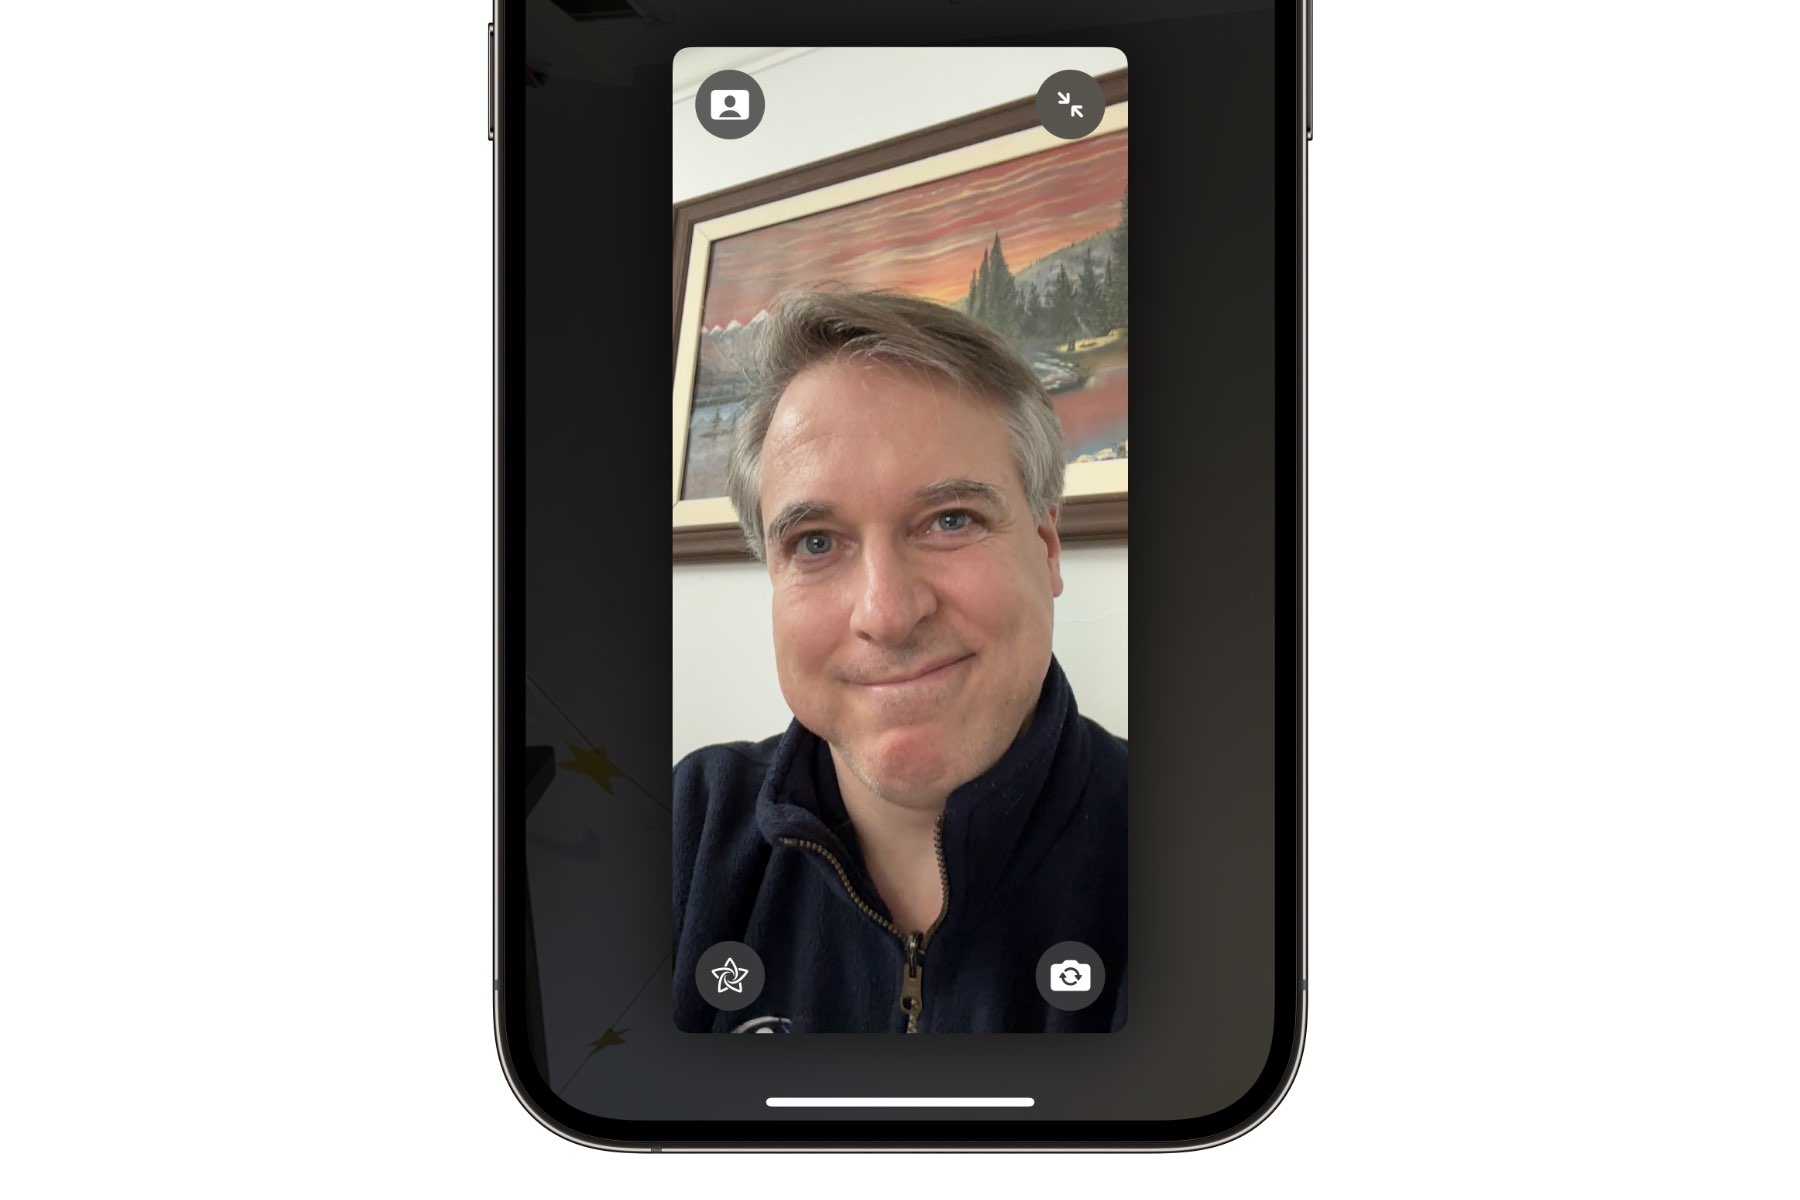 FaceTime with Portrait mode disabled on iPhone 14 Pro Max.